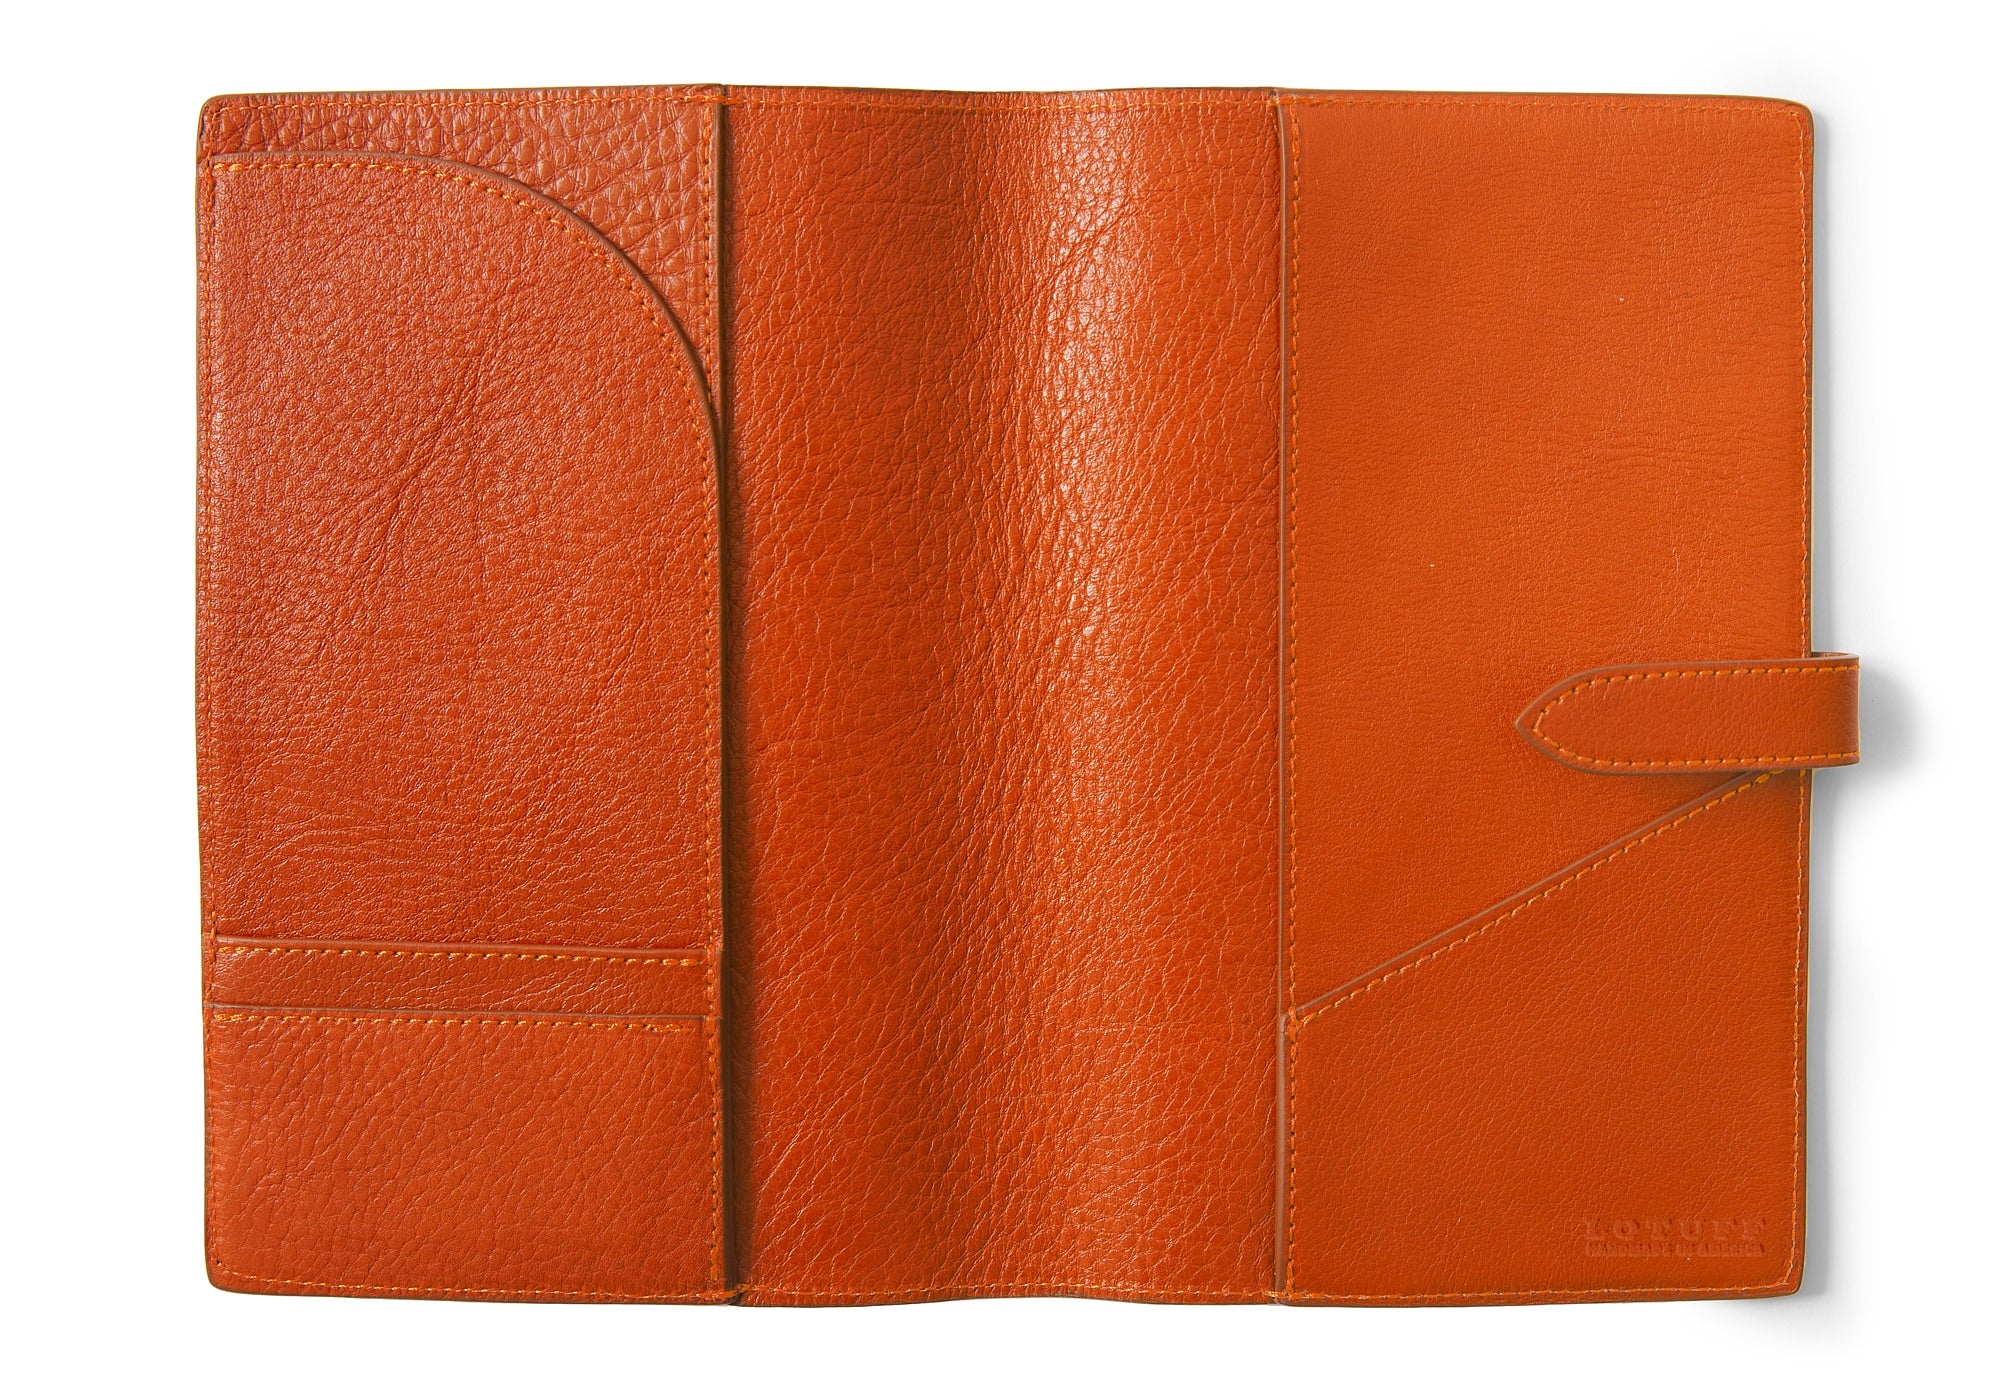 Top of Leather Travel Journal Orange